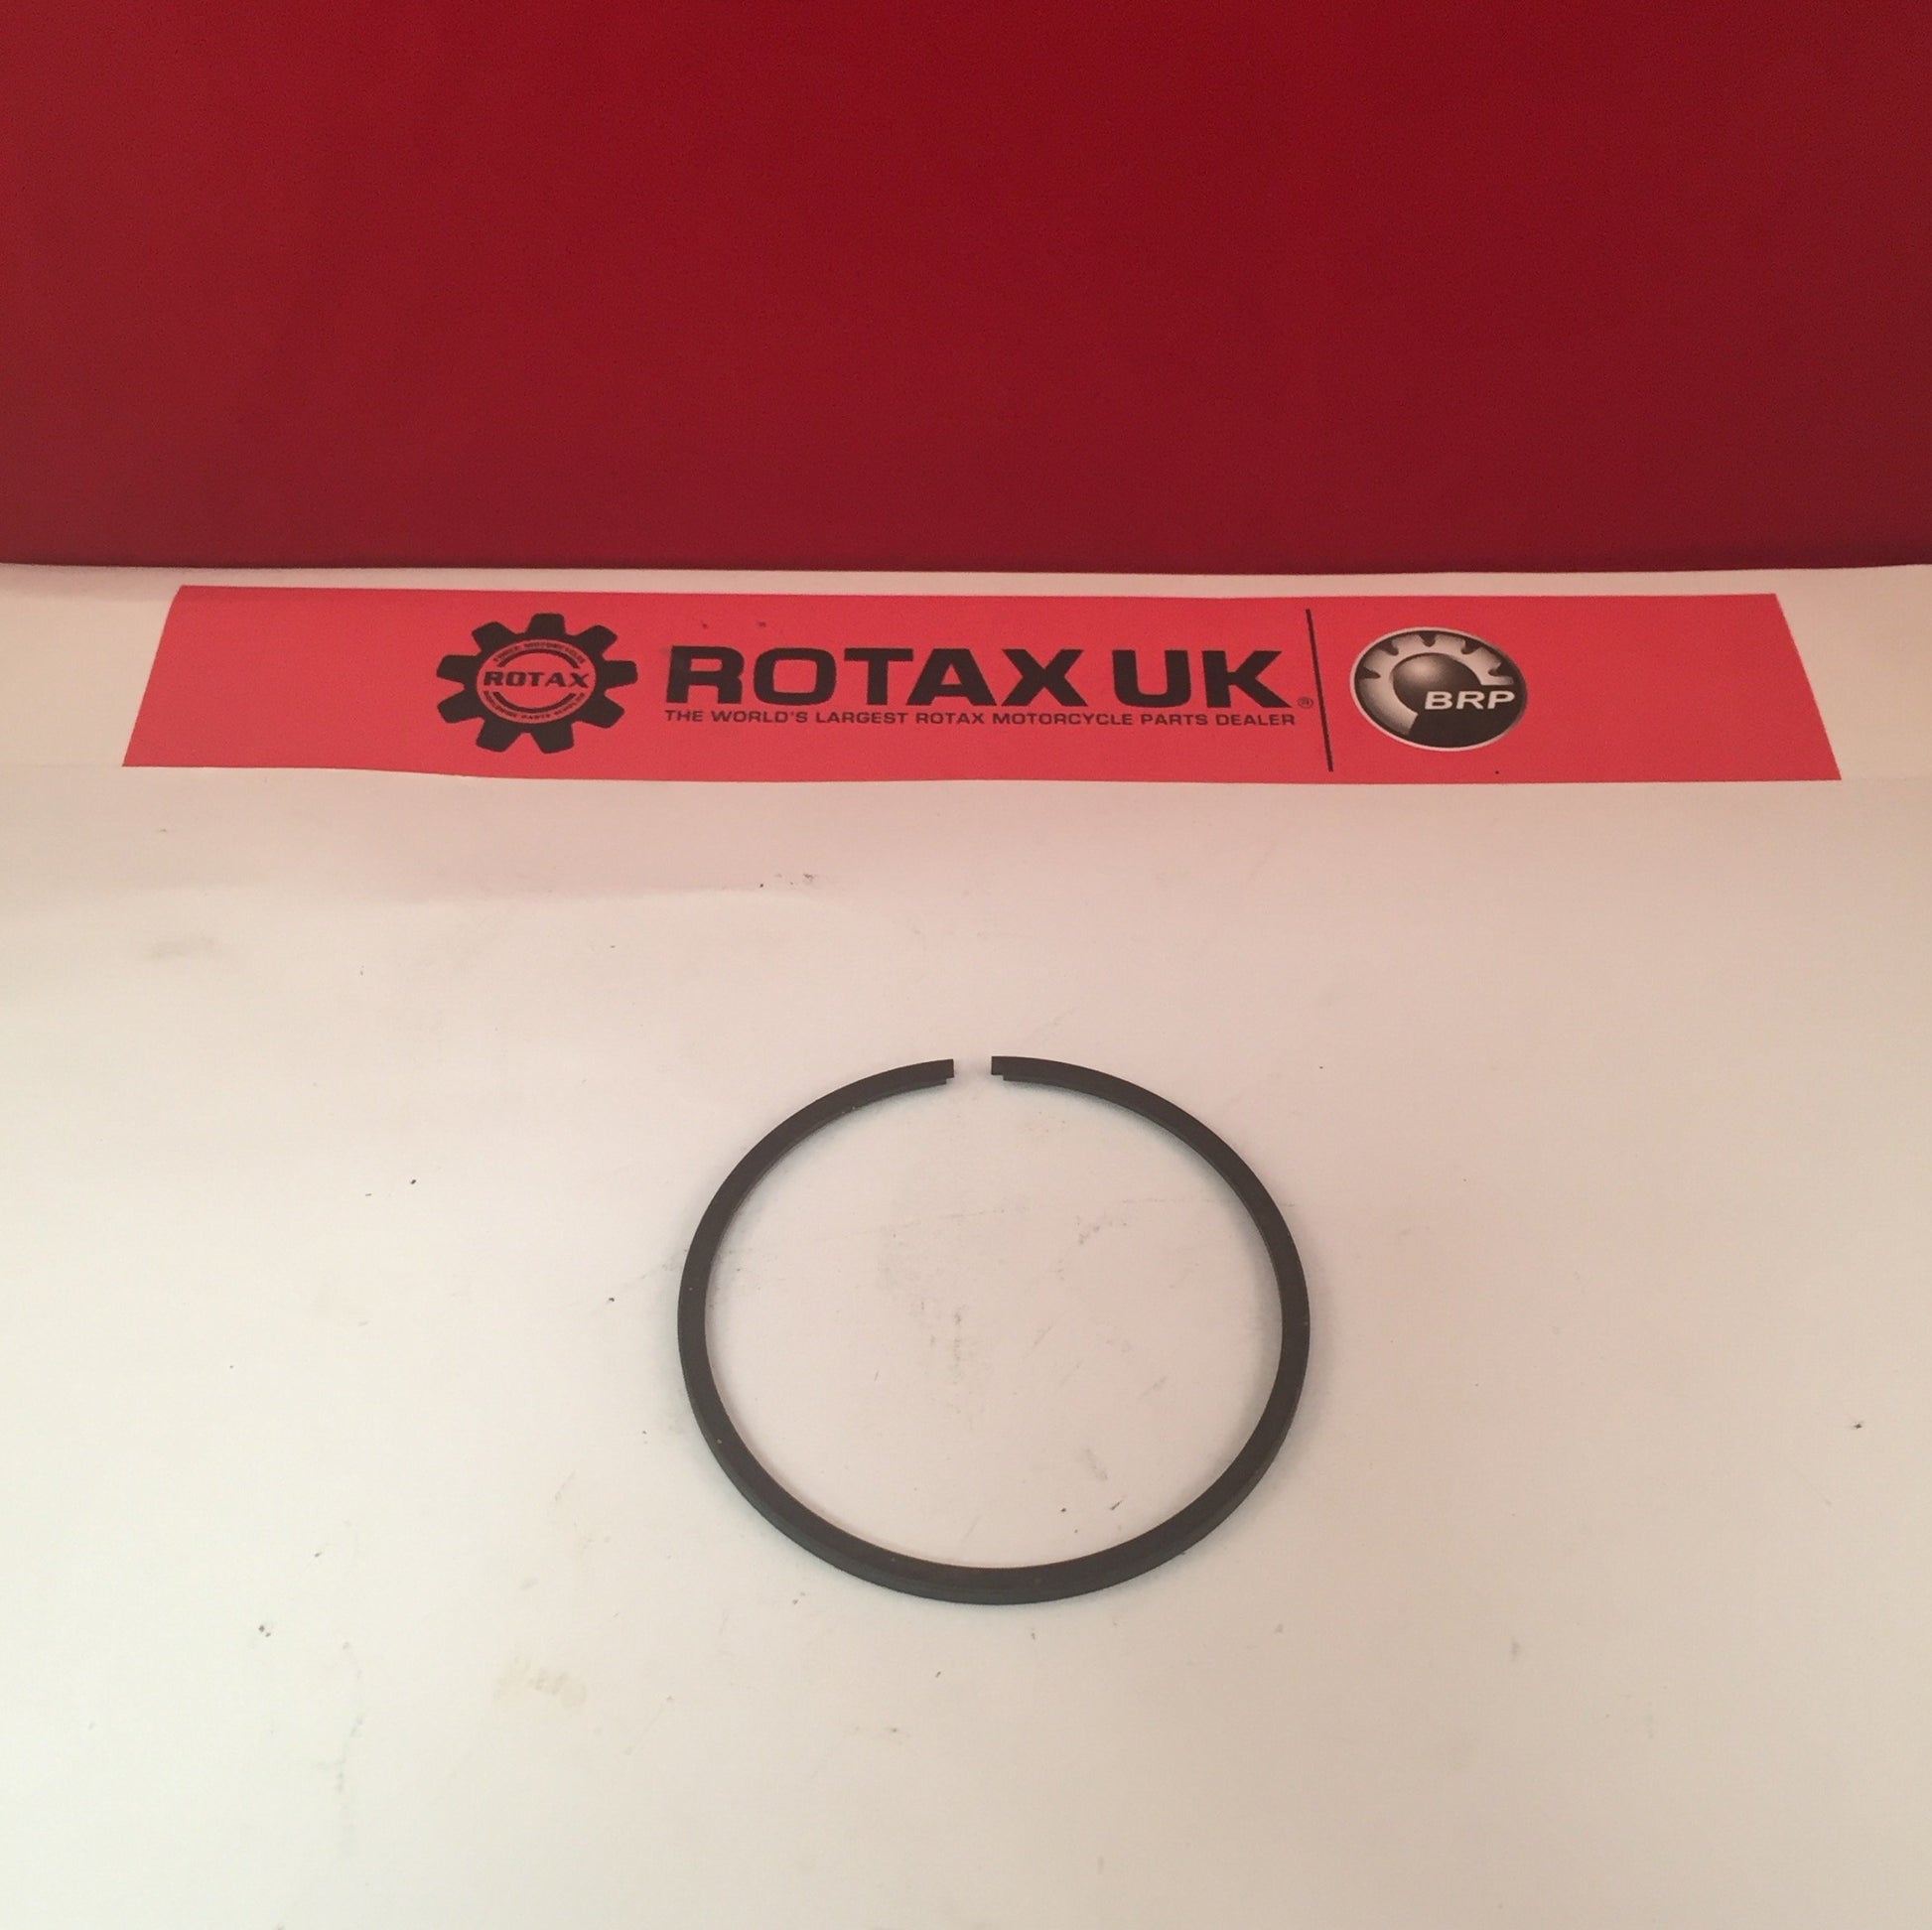 915566 - Piston Ring for engine types: 194.